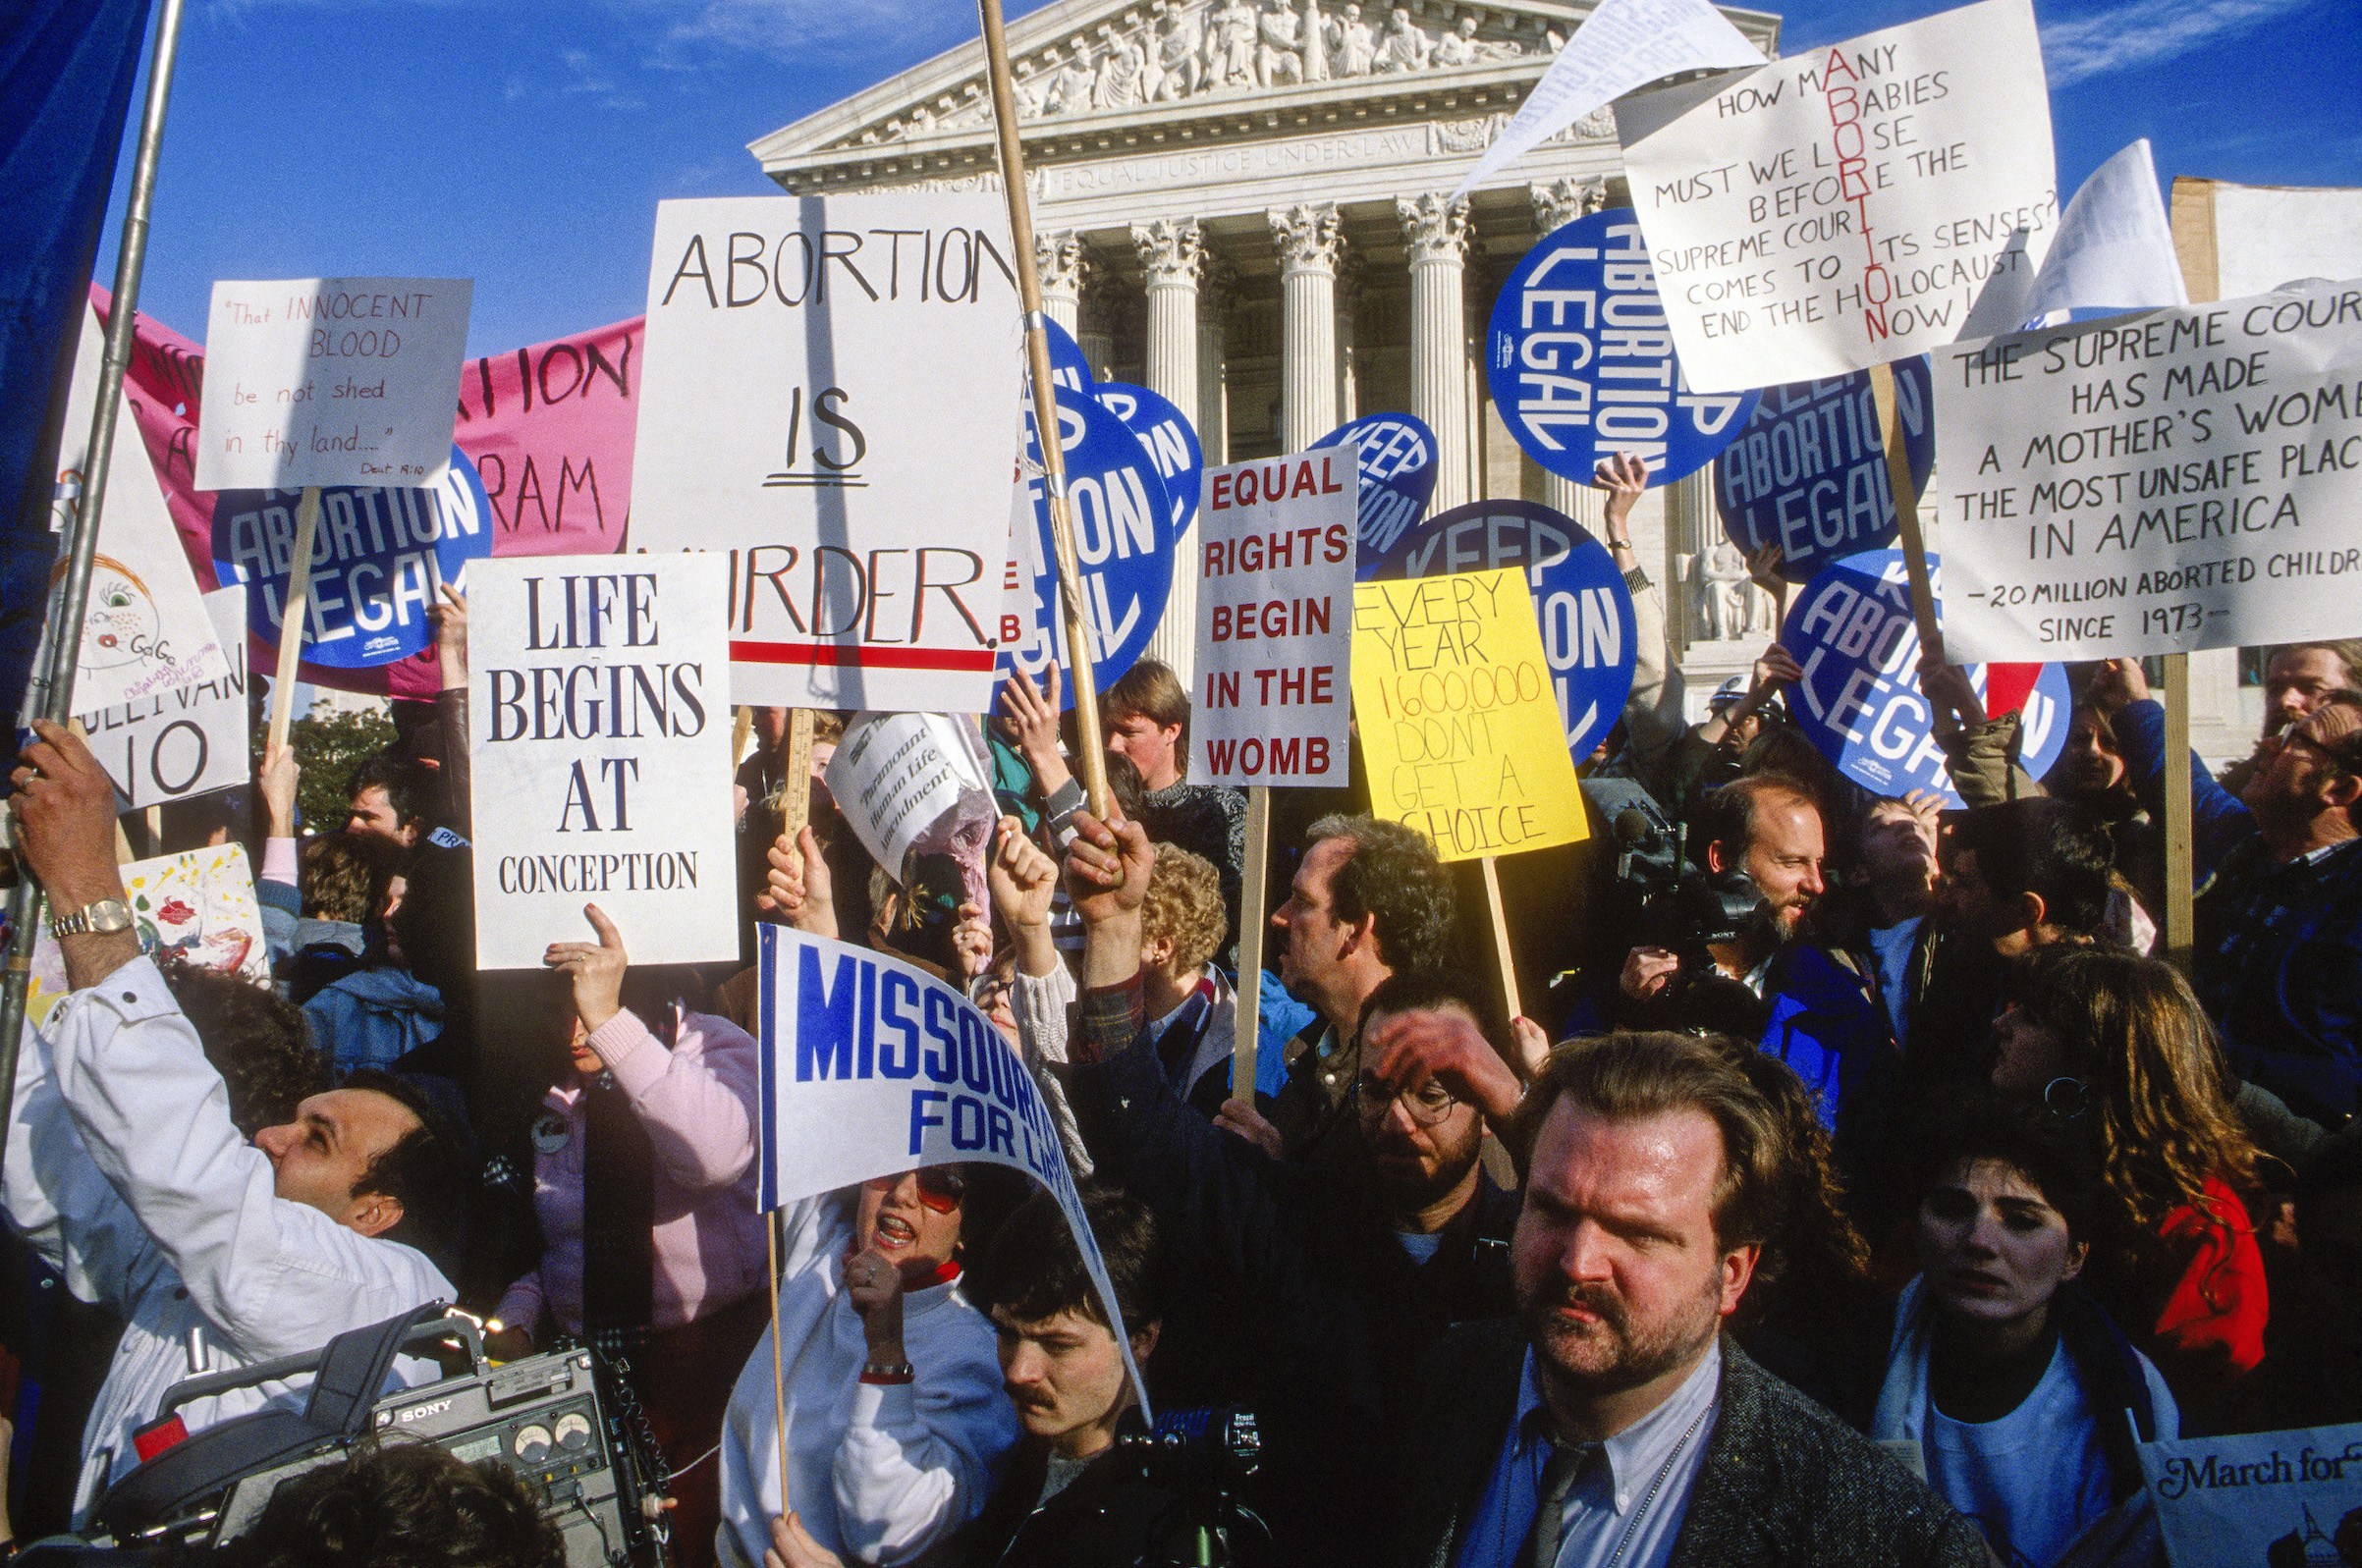 Anti-abortion and abortion-rights demonstrators both wave their signs outside the United States Supreme Court Building in Washington, D.C., on Jan. 22, 1989. (Mark Reinstein—Corbis / Getty Images)